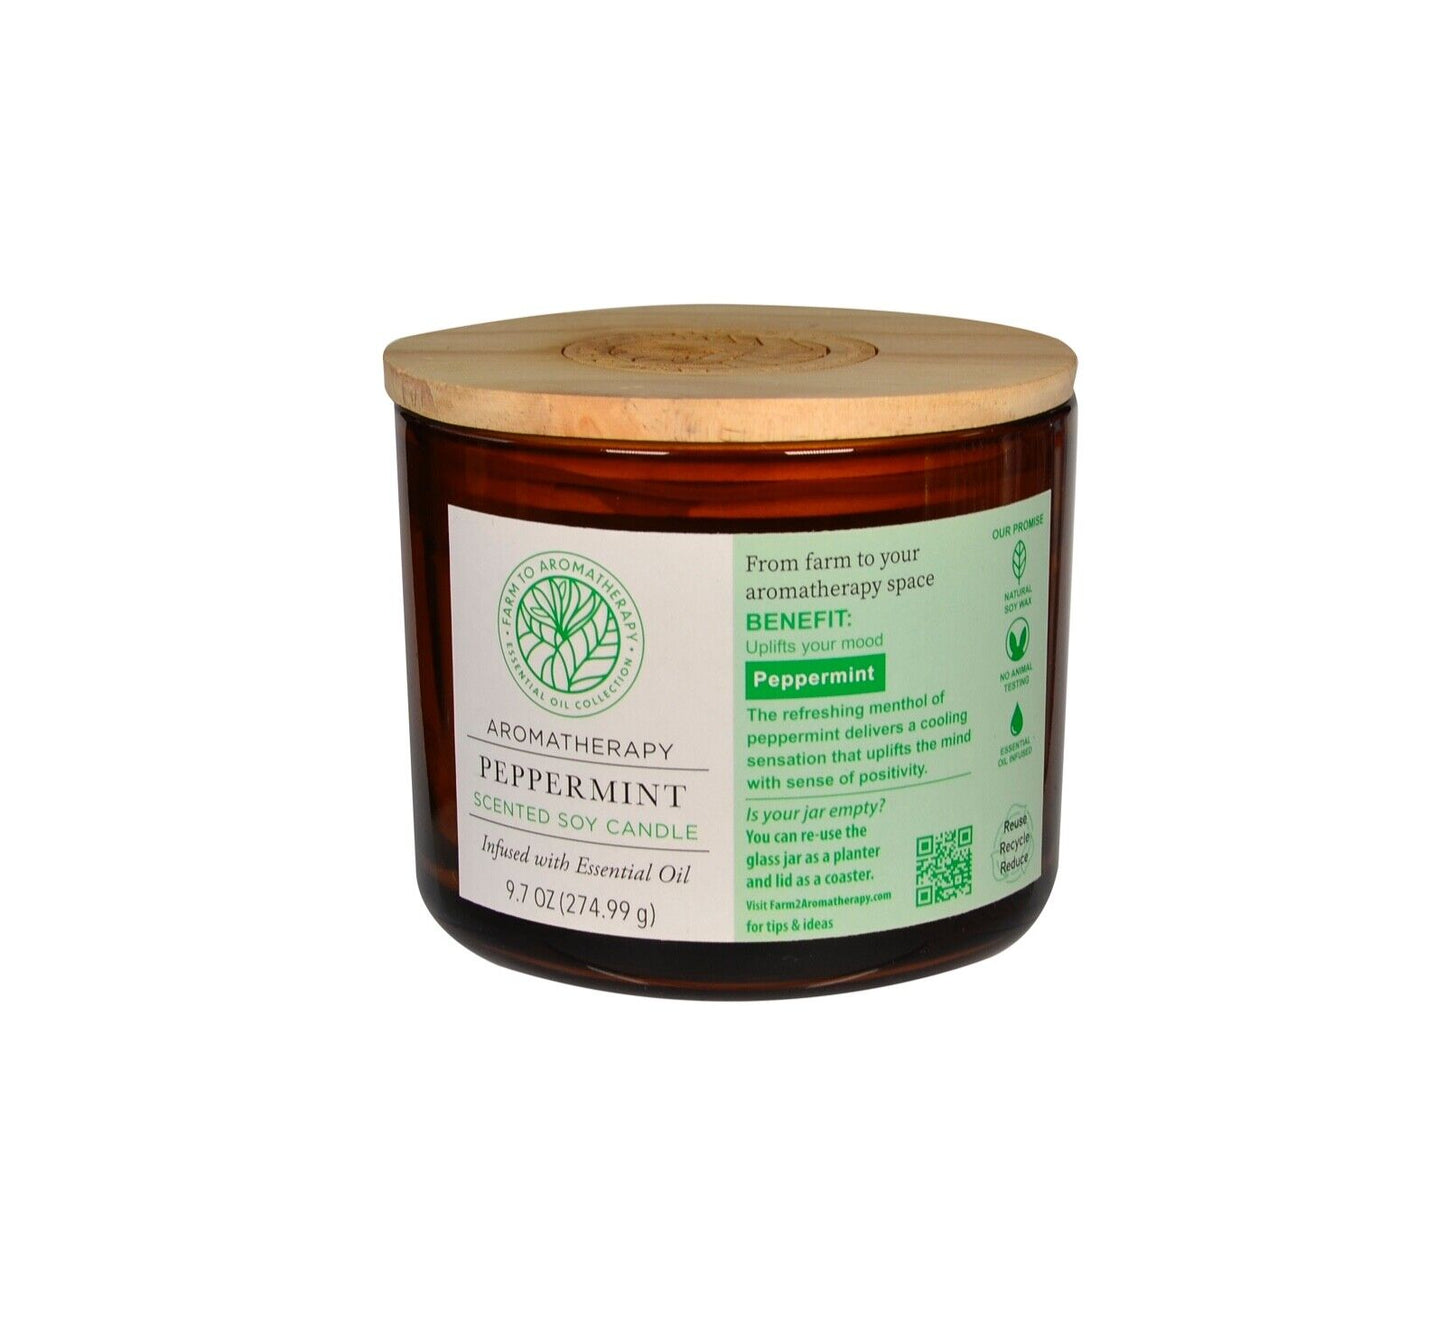 Aromatherapy Peppermint Scented Soy Candle Infused with Essential Oils (275g)